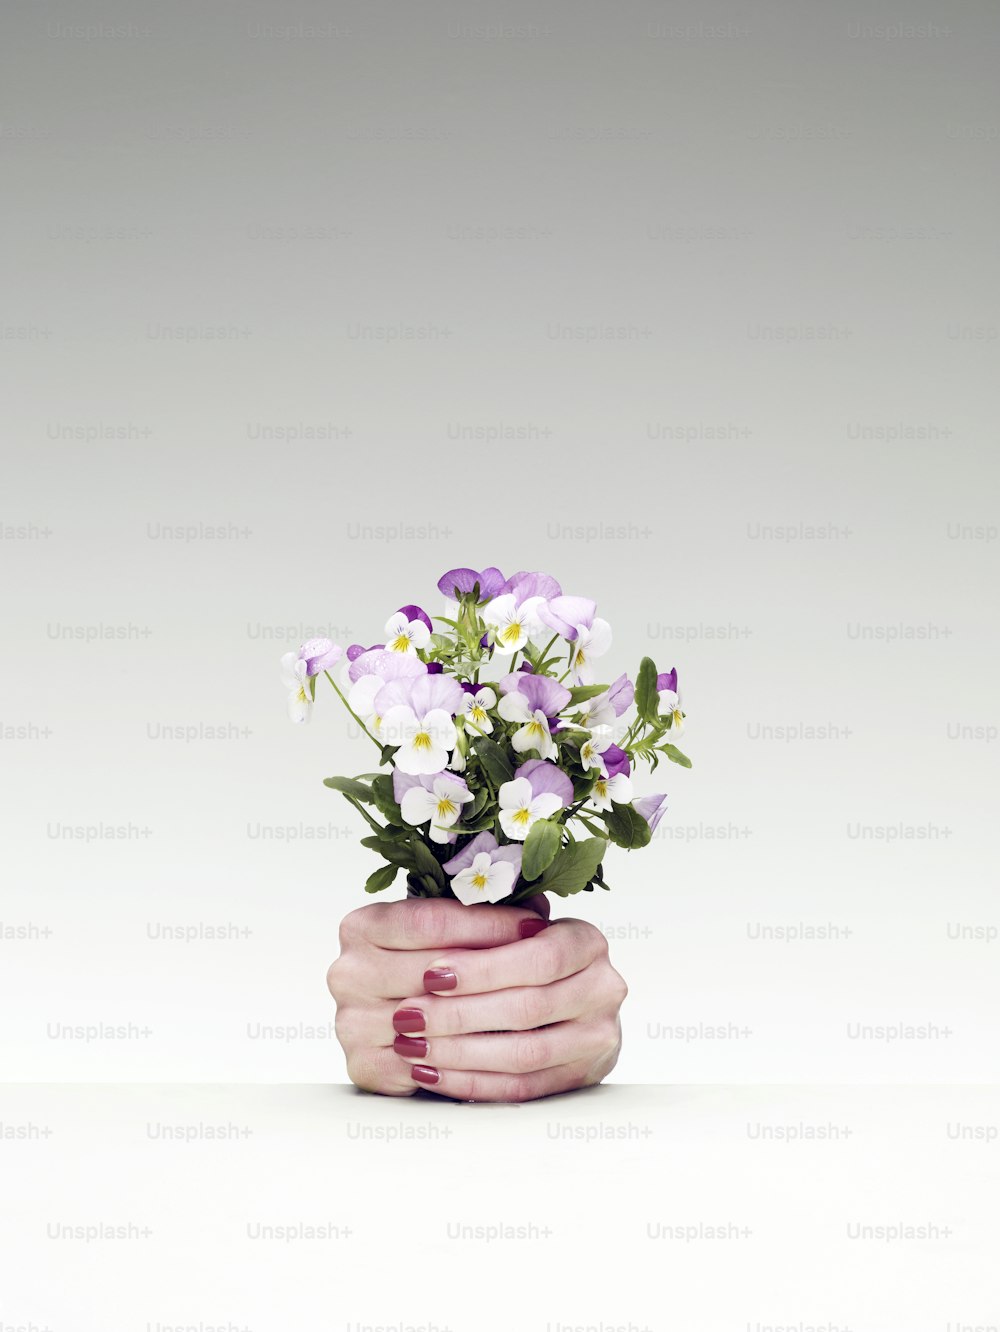 a woman's hand holding a bouquet of flowers